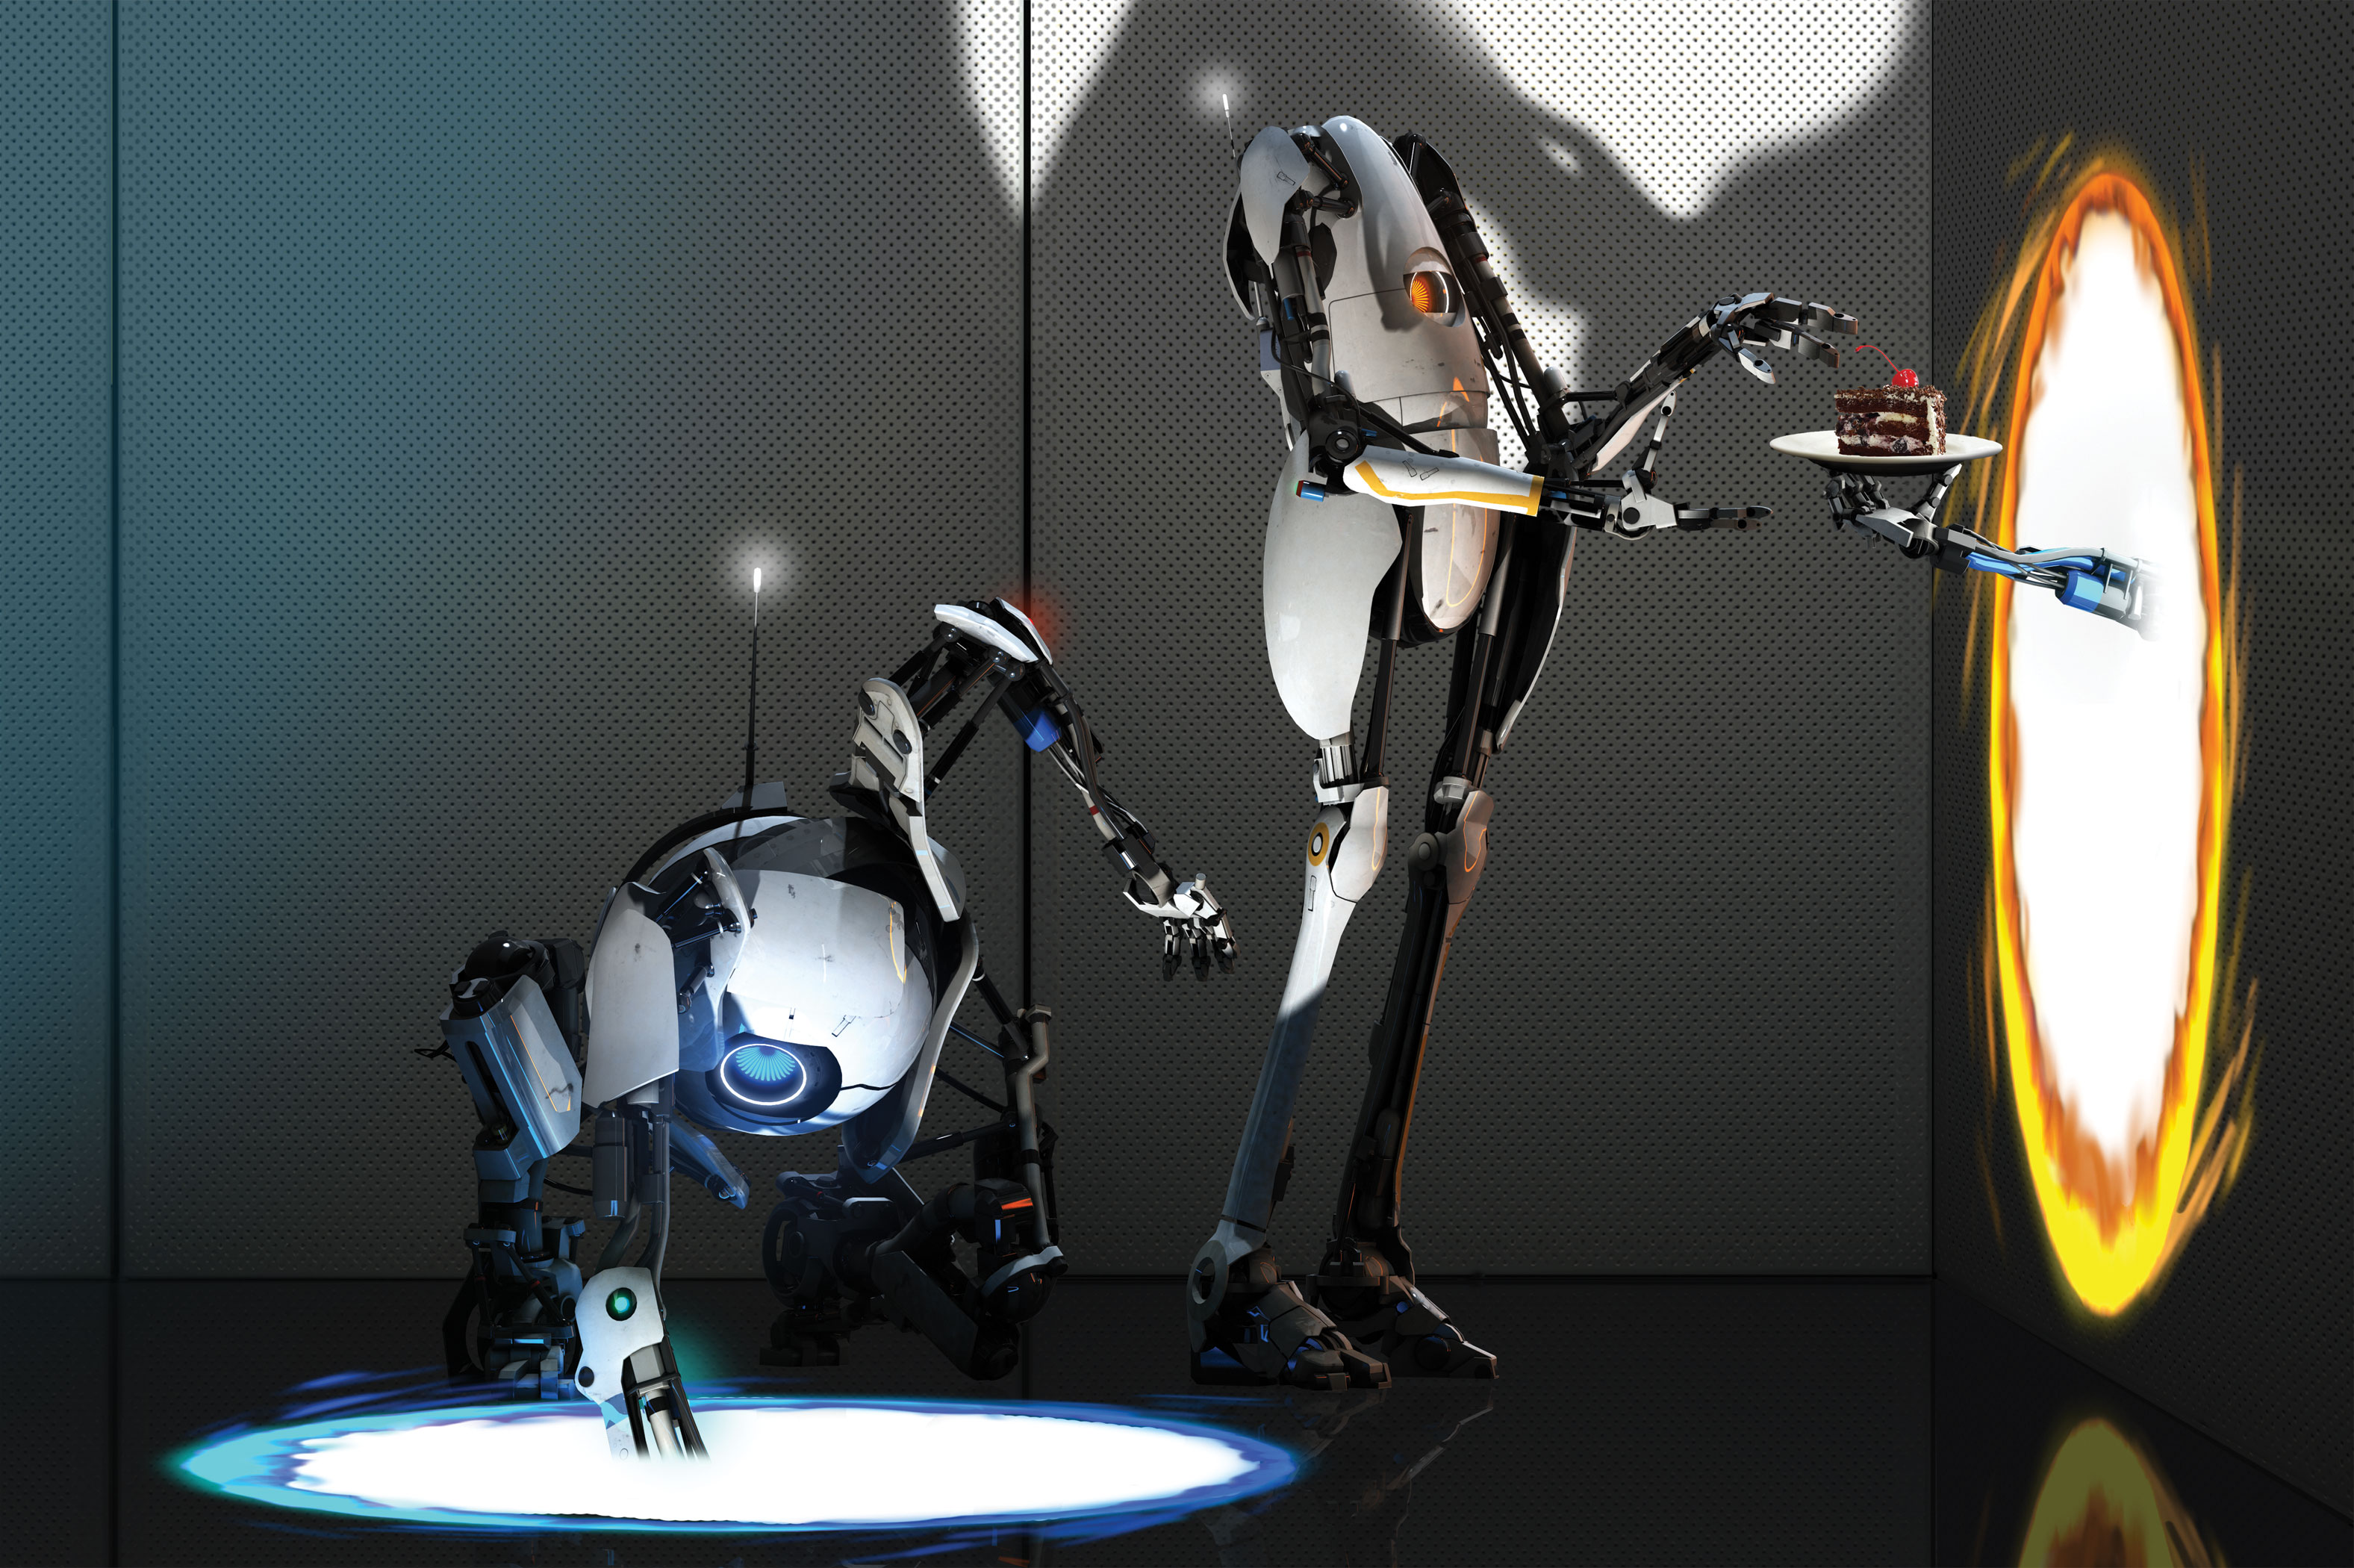 A kneeling robot sticks its arm into the ground while another stands nearby accepting a slice of cake from a disembodied hand.